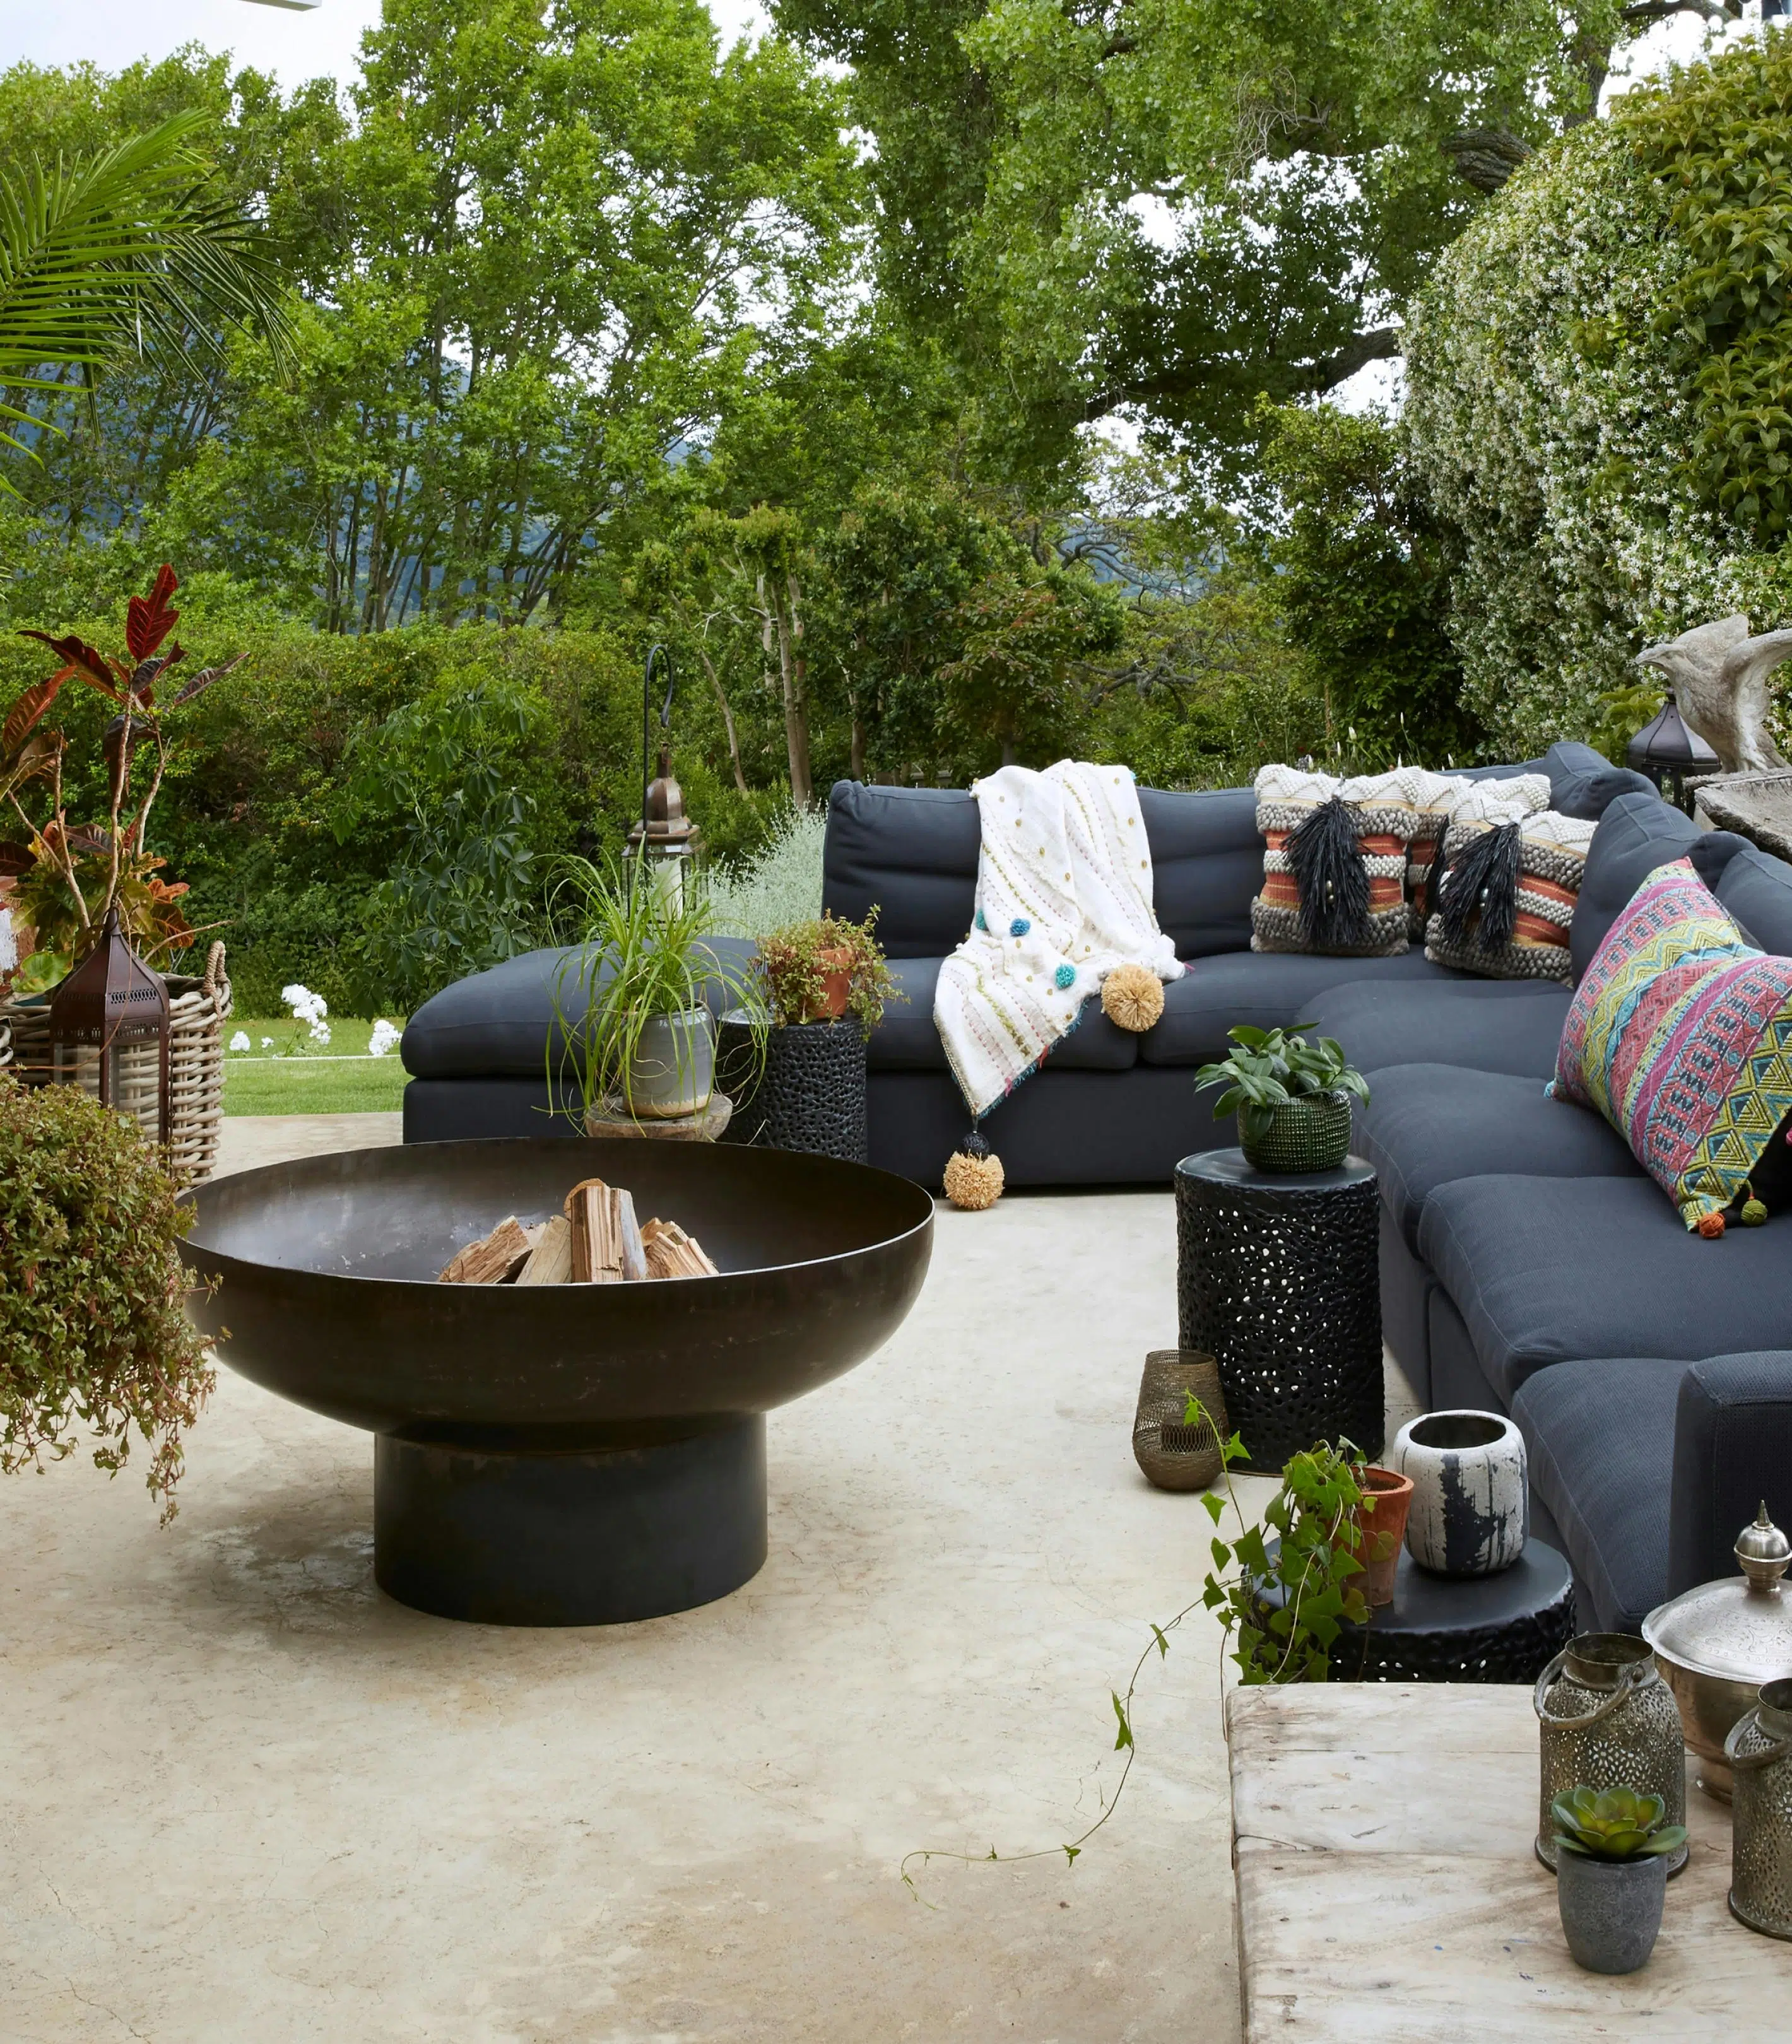 A Moroccan-inspired fire pit is surrounded by an outdoor sofa and lush greenery.